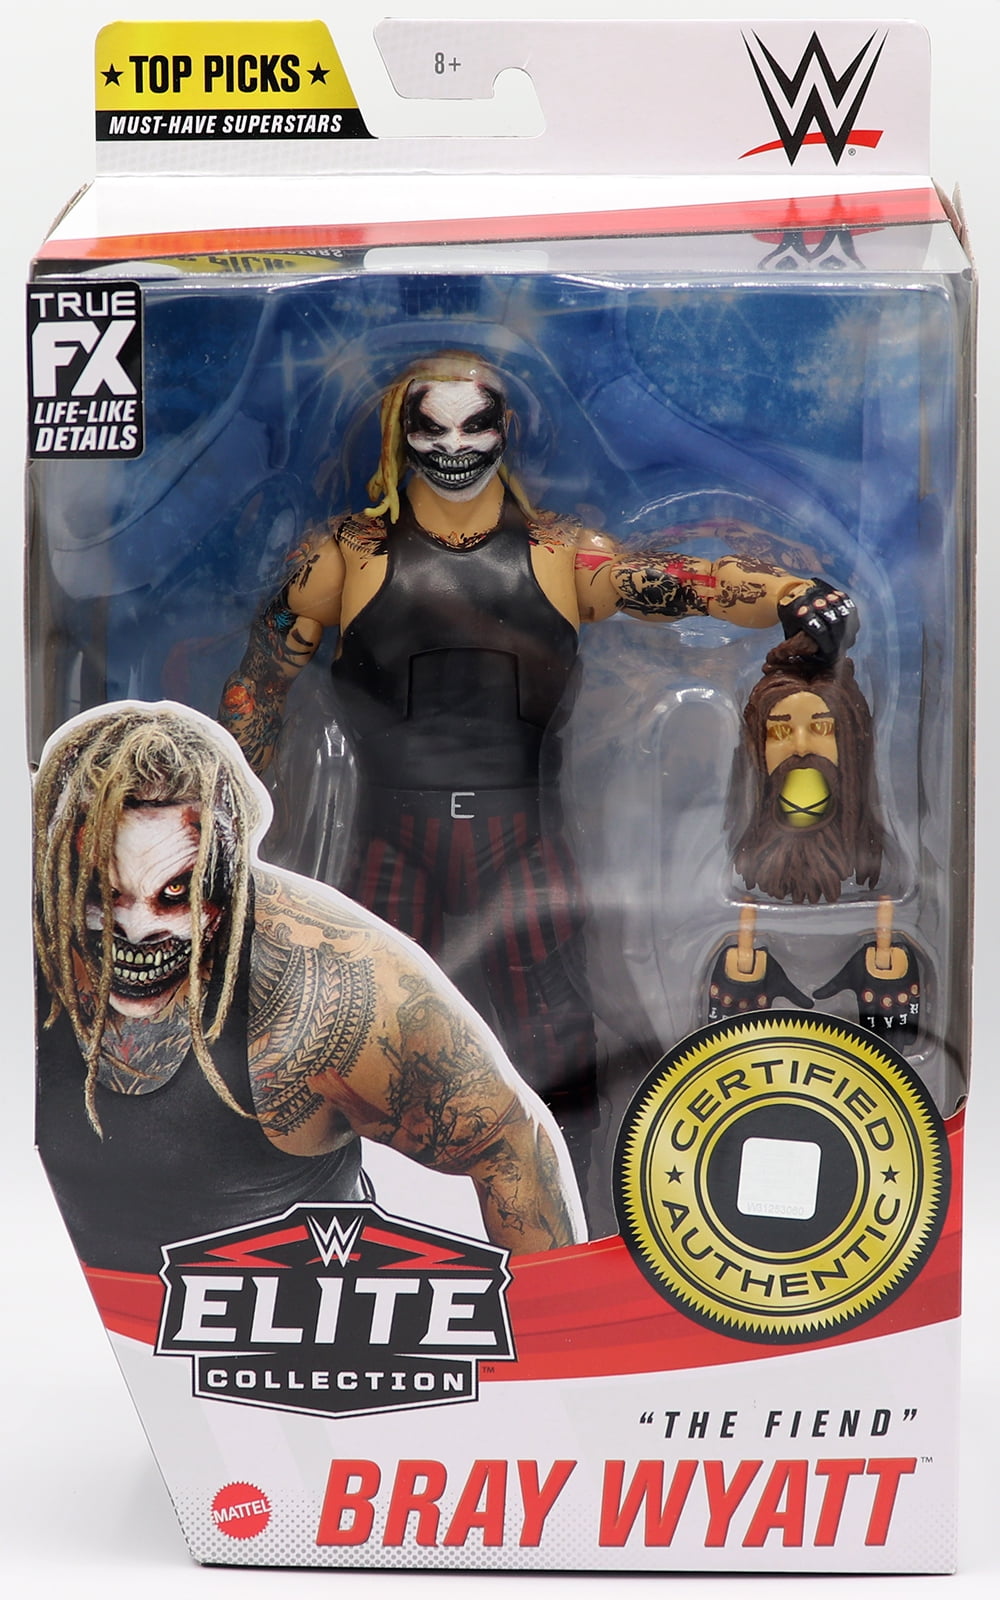 WWE Basic Series Then Now Forever Bray Wyatt Action Figure 6.5 Inches 